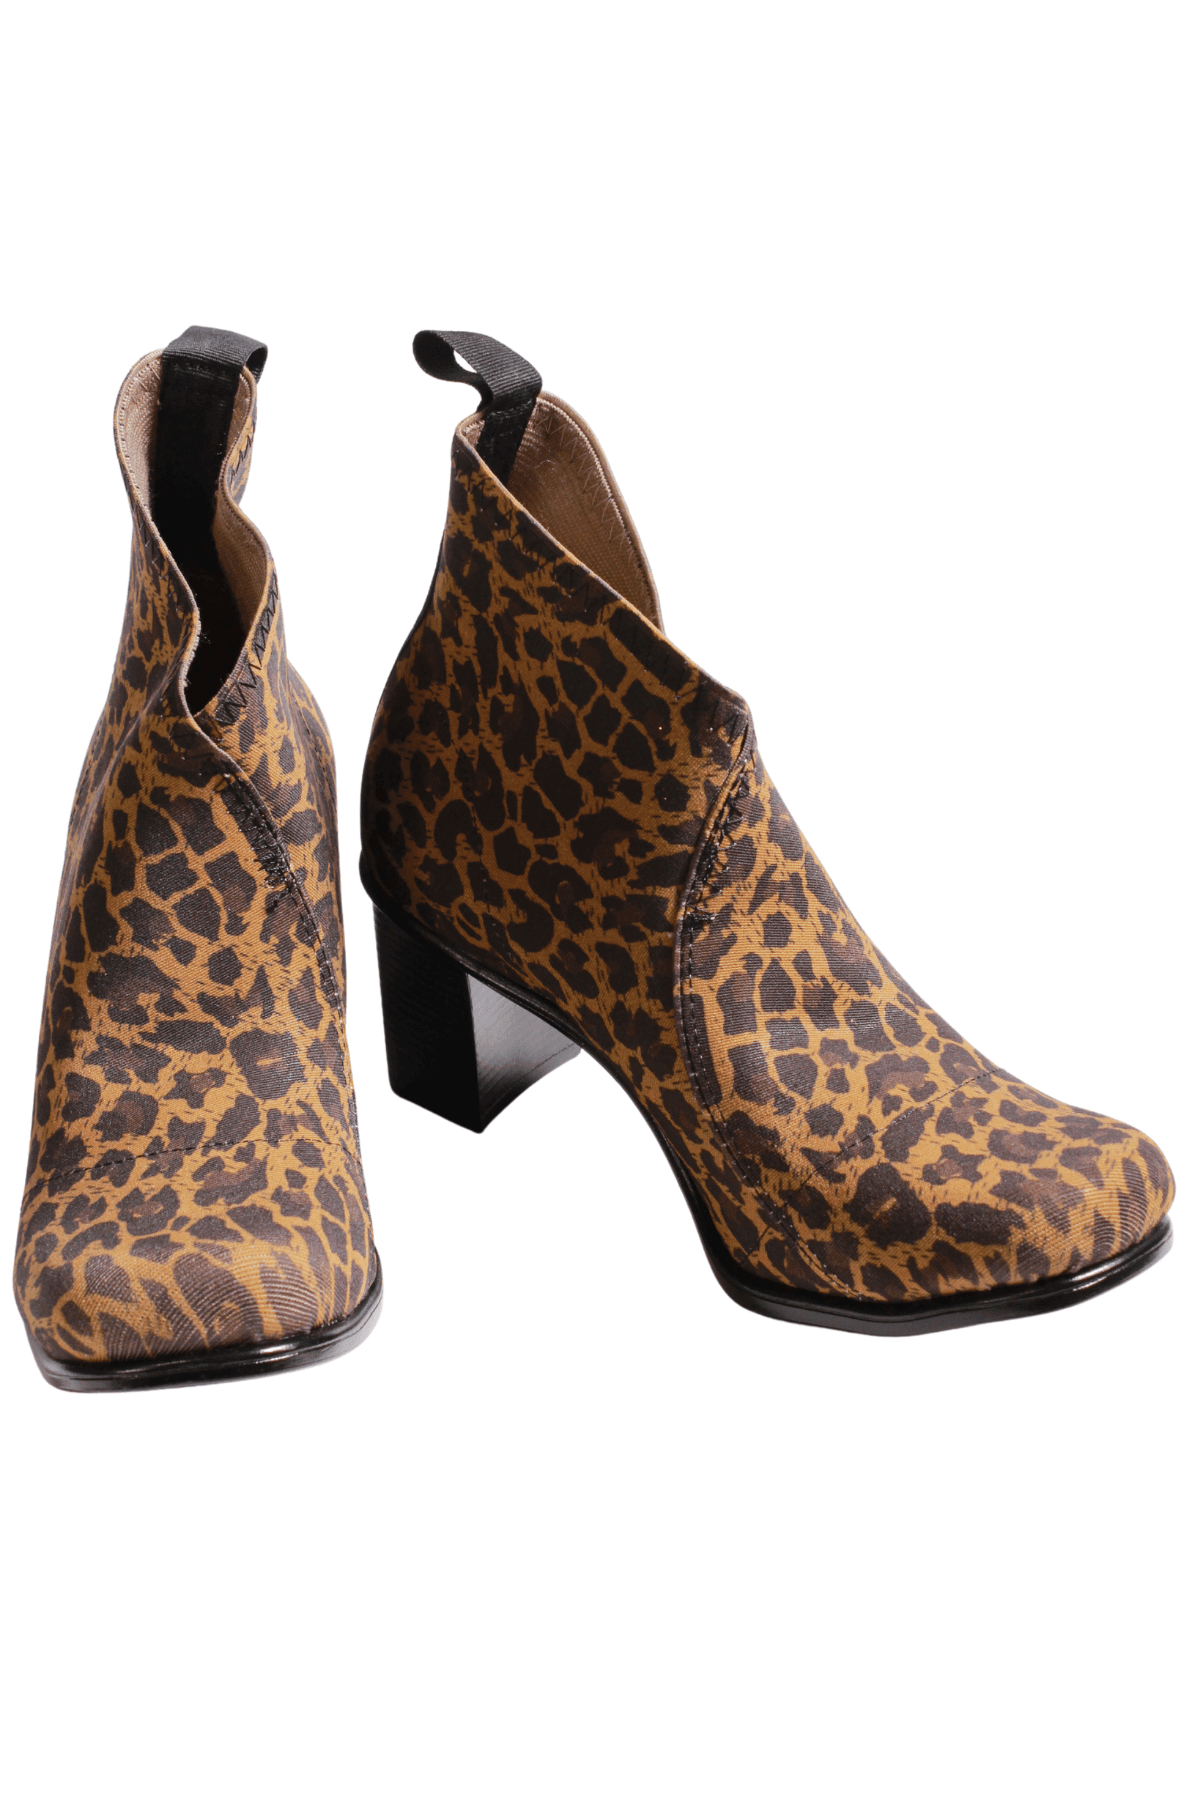 side view of leopard slip on style bootie with a stacked 2" rubber bottom heel and a stretch elastic upper with a pull back tab